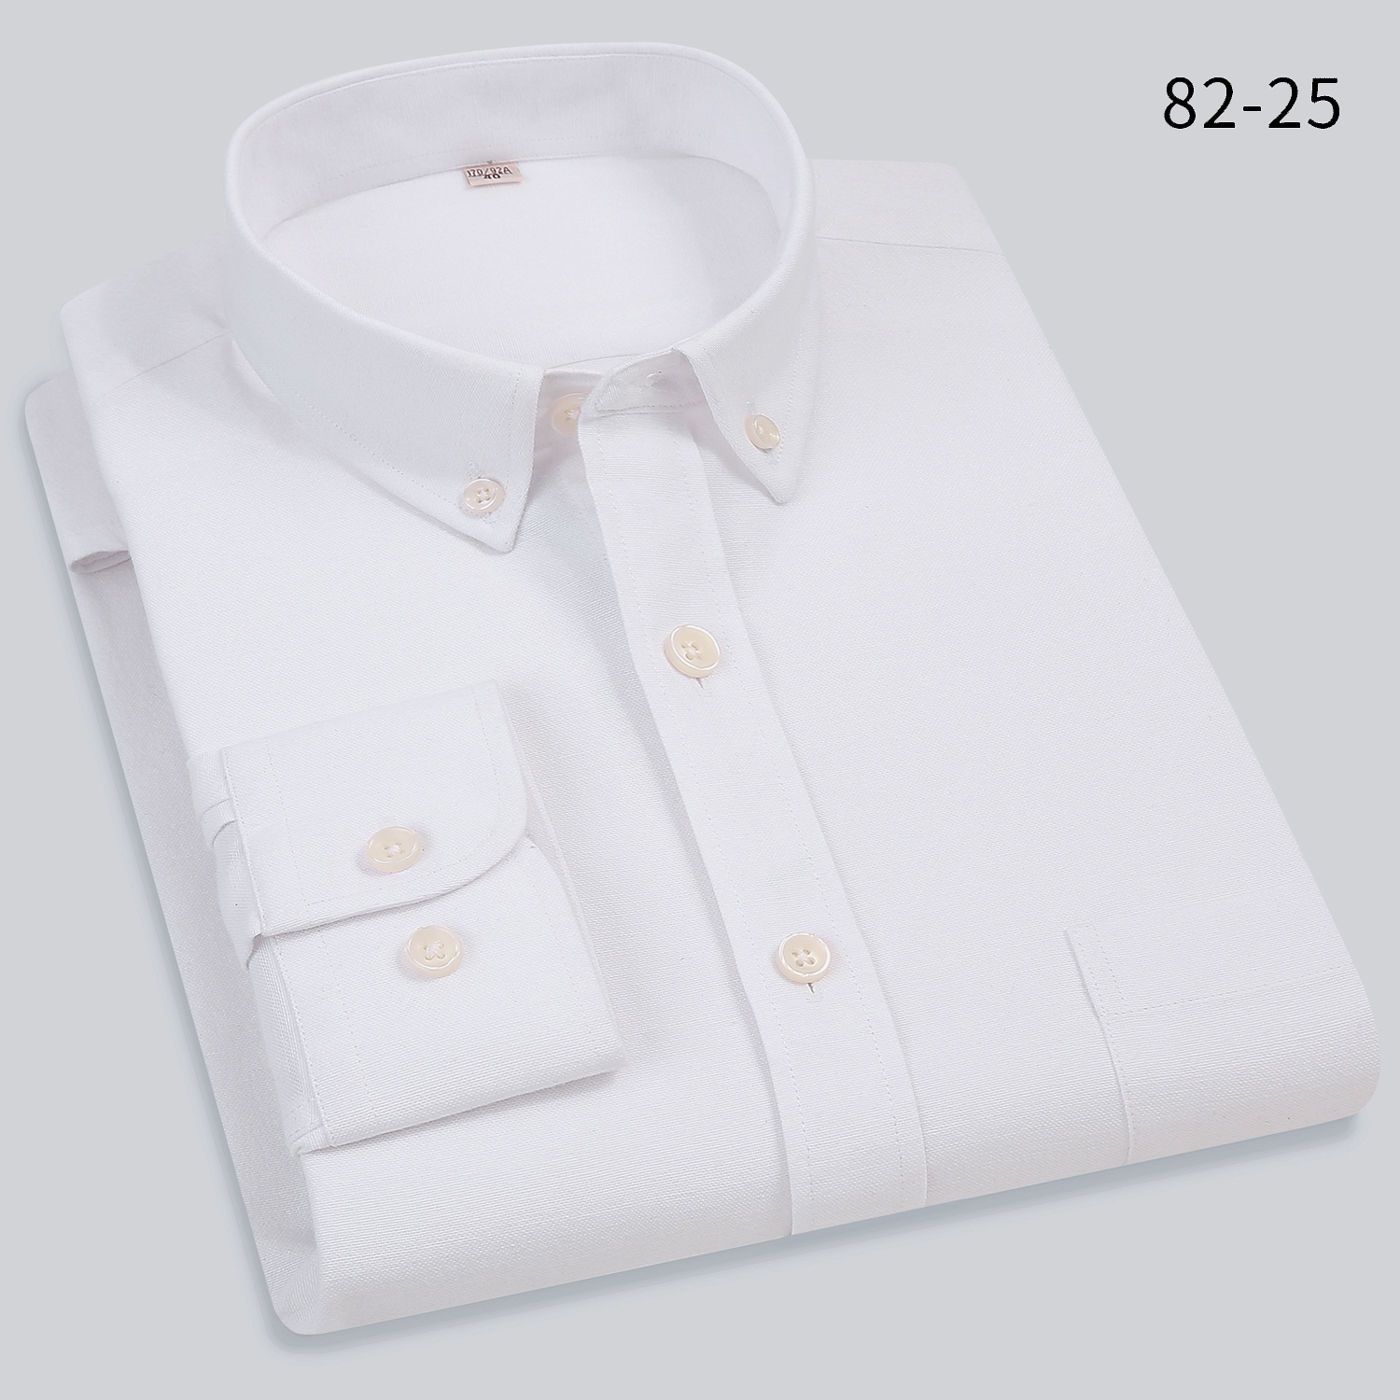 Paul spring and autumn men's shirt long sleeve Oxford spinning business casual white shirt middle aged and young non iron solid color top